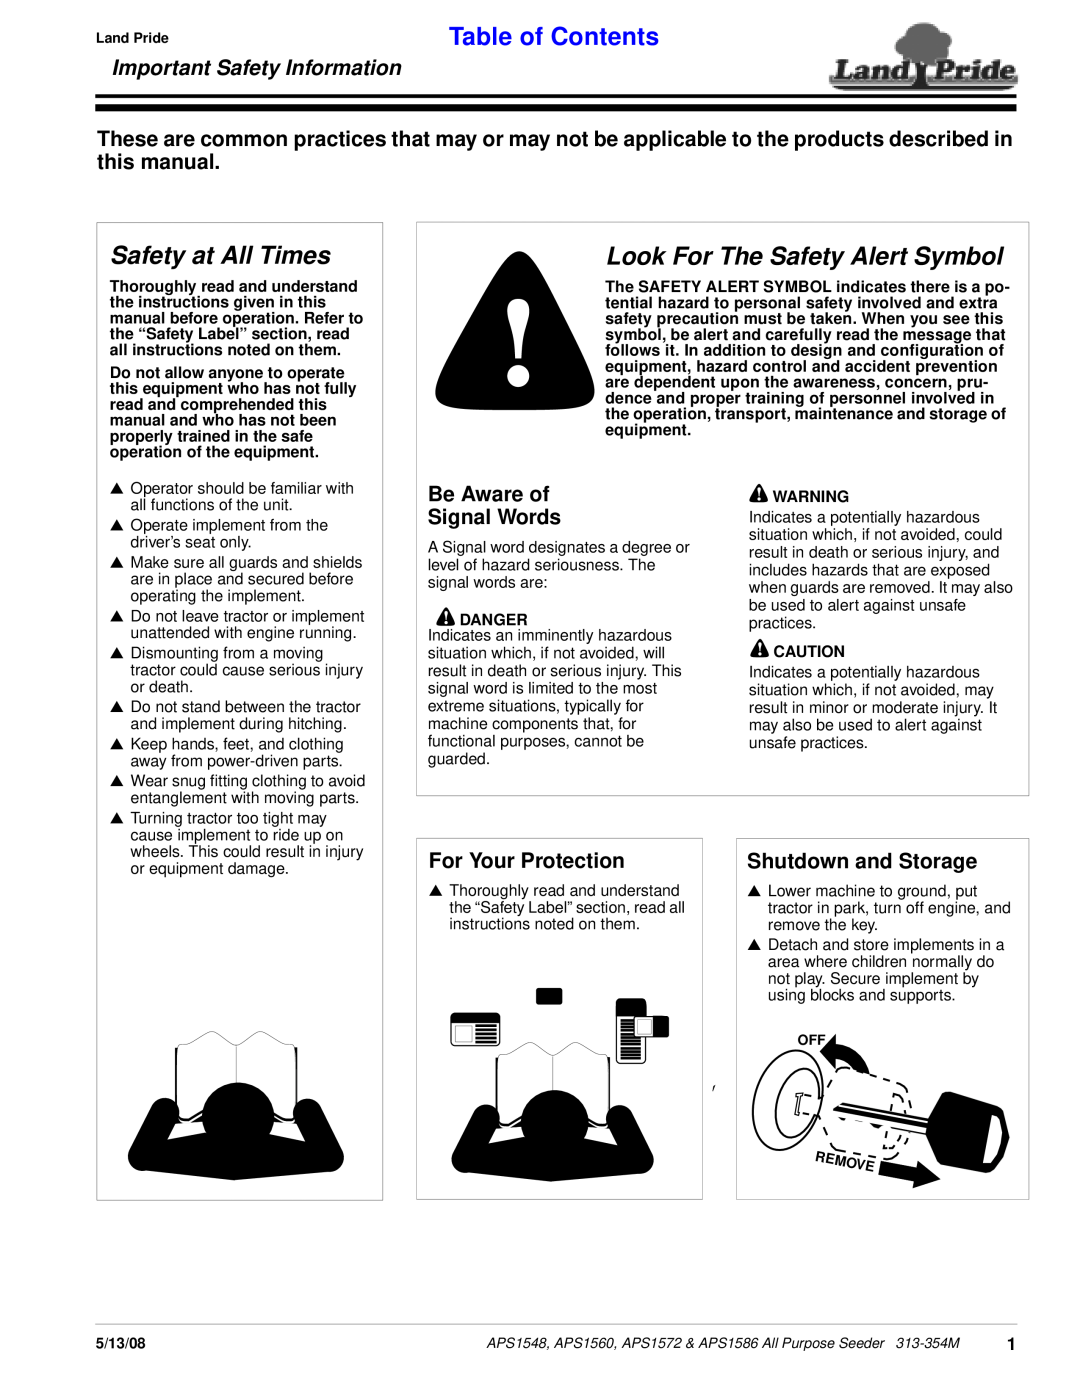 Land Pride APS1548 Safety at All Times, Look For The Safety Alert Symbol, Table of Contents, Important Safety Information 